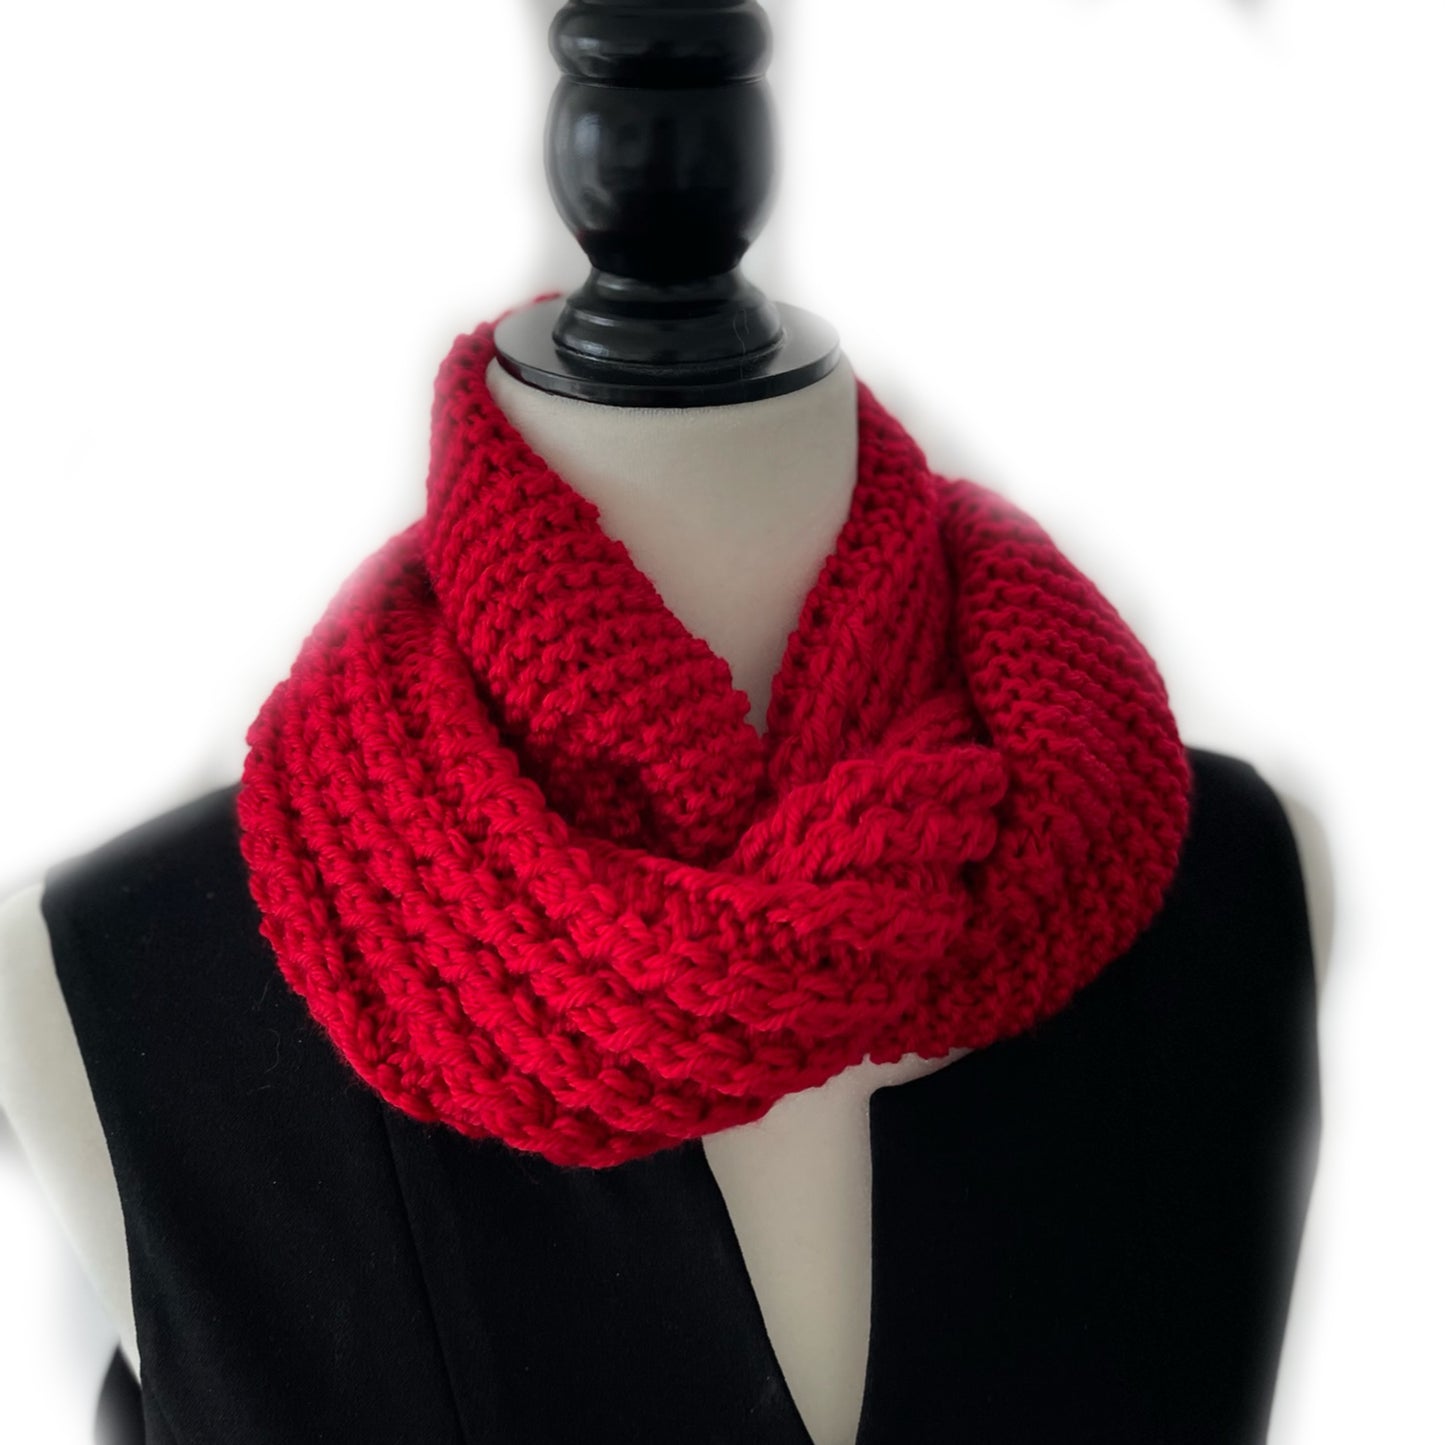 Hand-knitted Infinity scarf